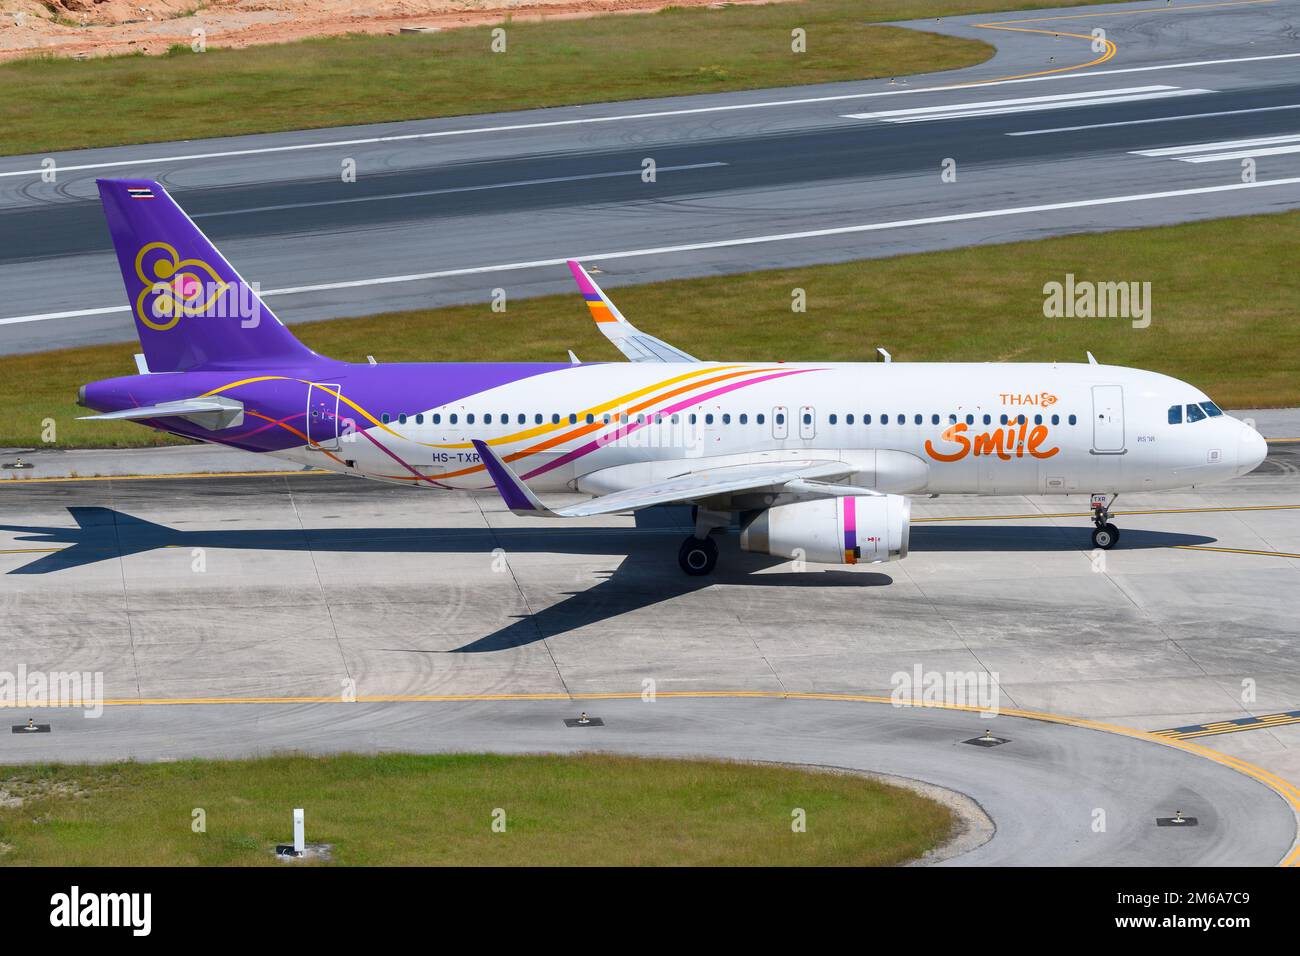 Thai Smile Airways Airbus A320 Rolling. Flugzeug A320 der Thai Smile Airline. Low-Cost-Tochtergesellschaft von Thai Airways. Thai Smile Airways Flugzeug. Stockfoto